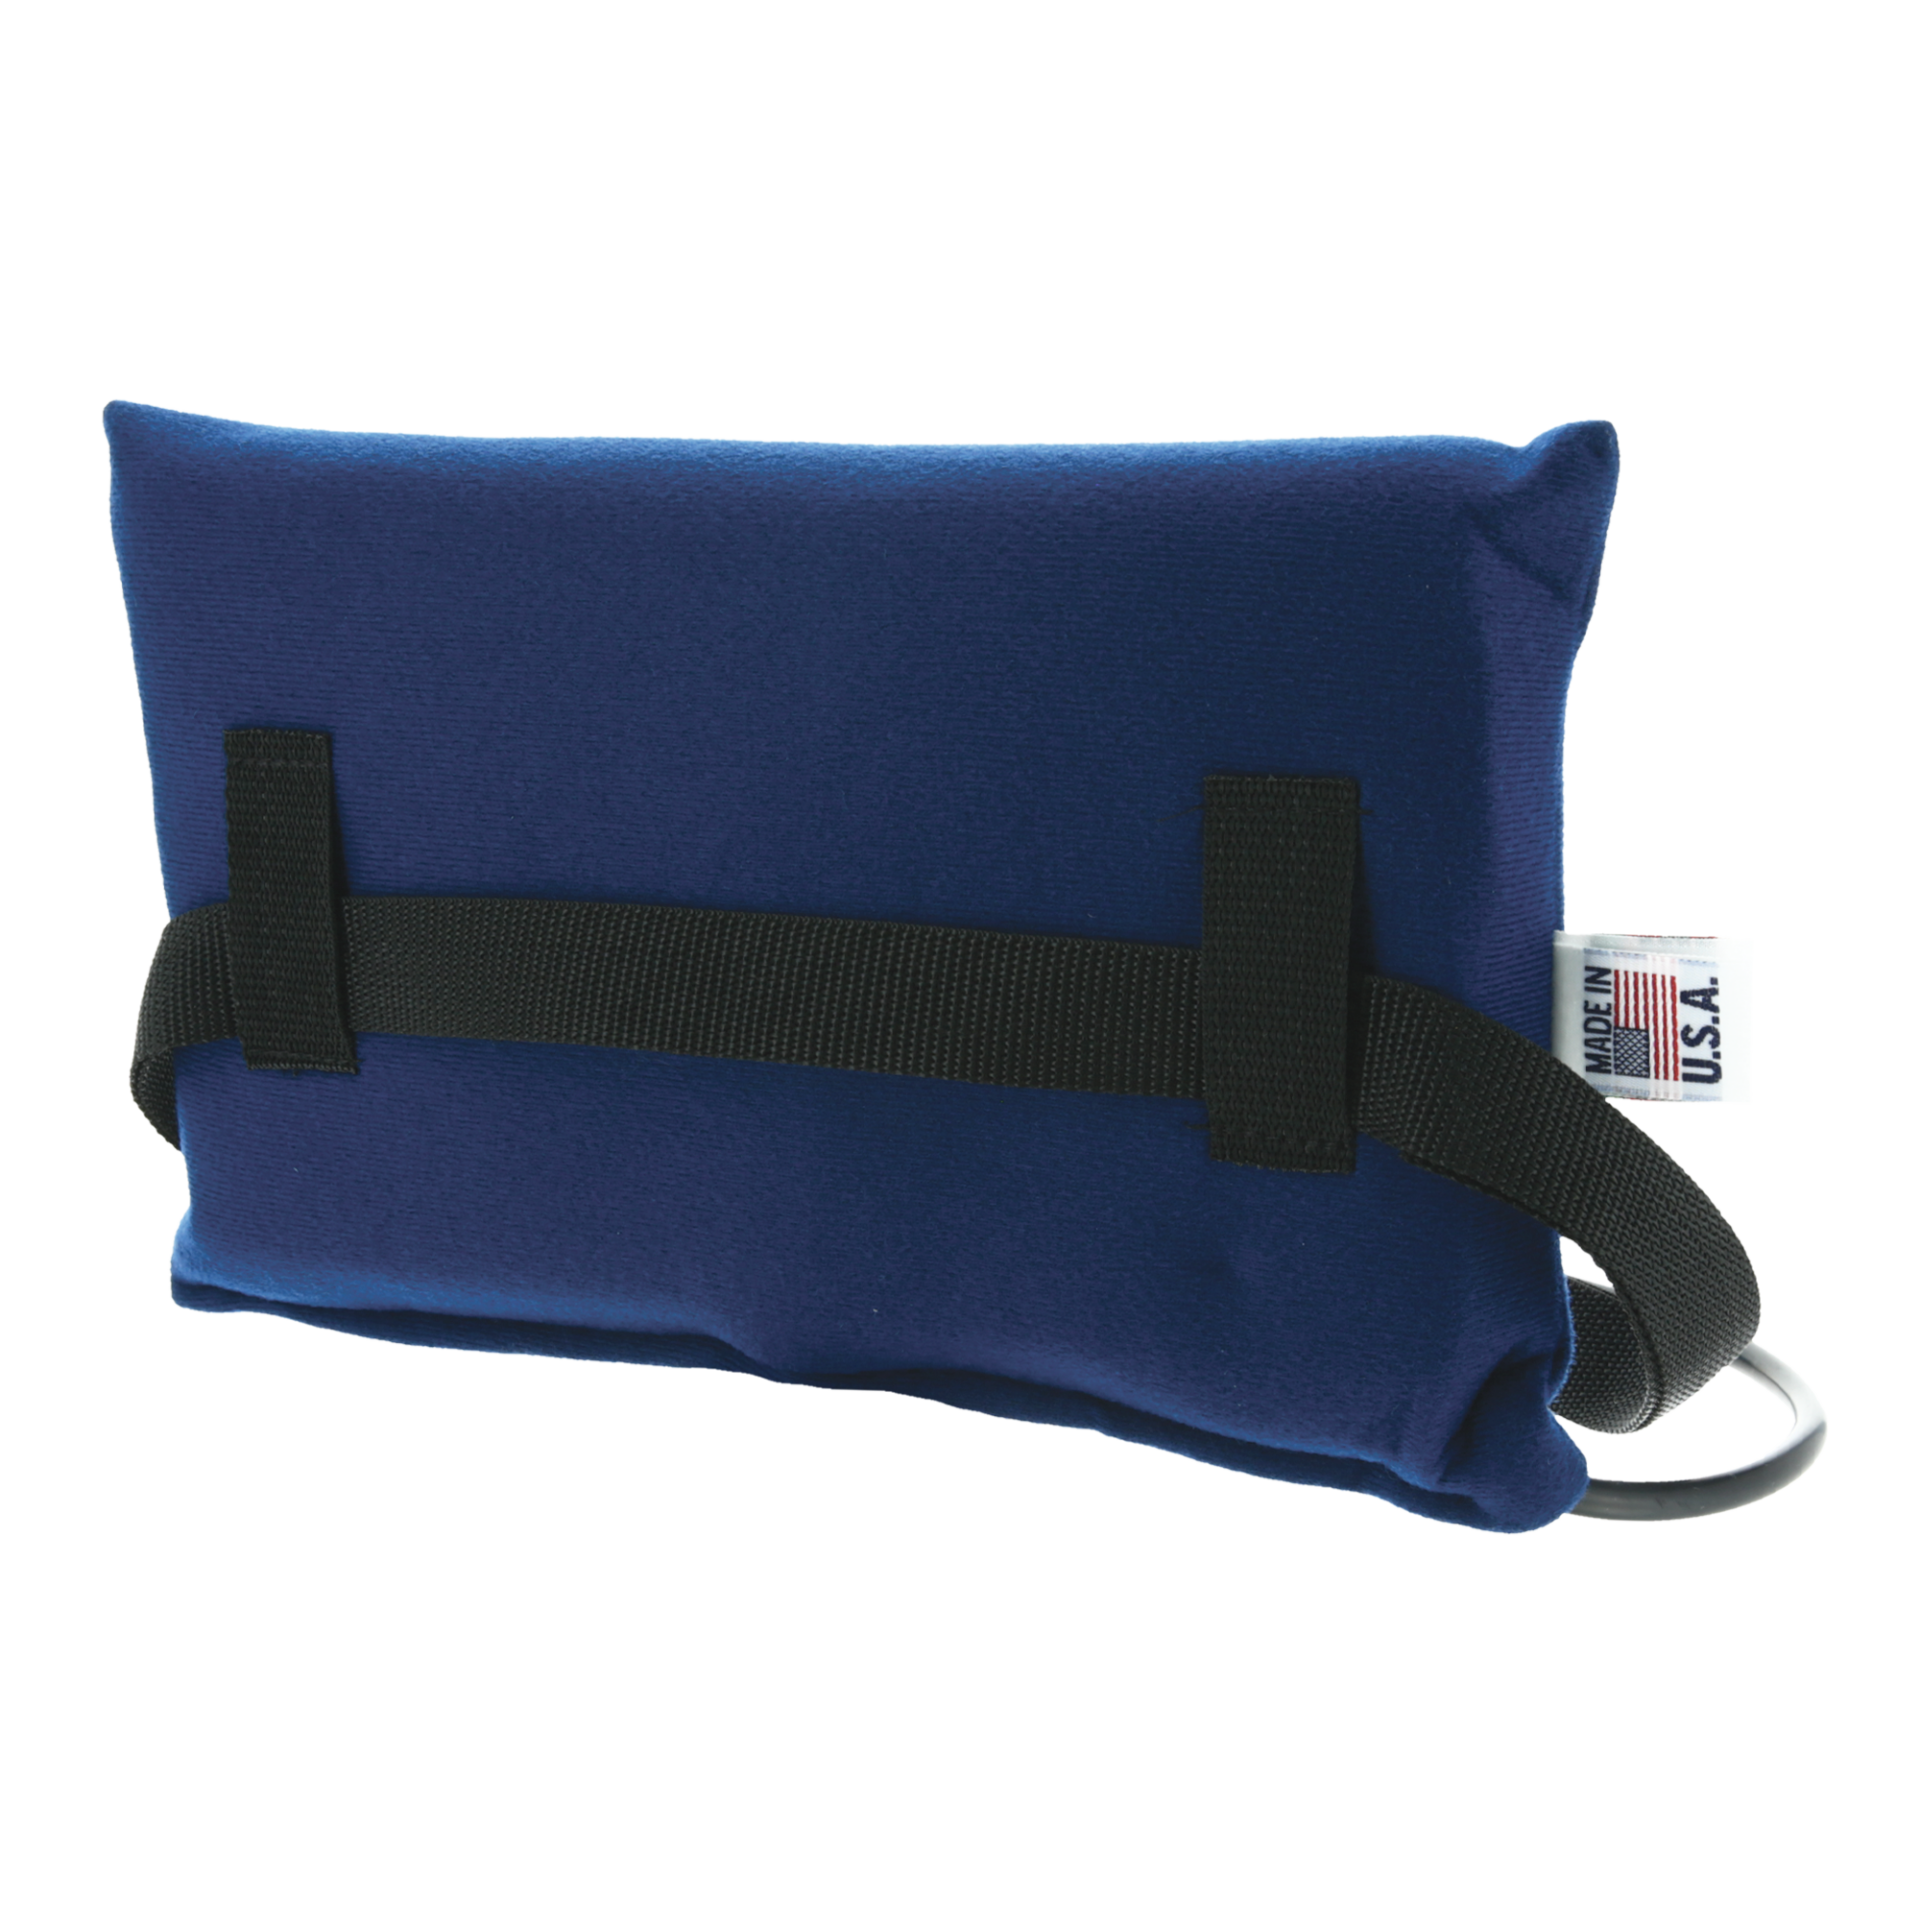 https://www.chiro1source.com/wp-content/uploads/2021/05/bak-460-bl-small-inflatable-lumbar-cushion-blue-back-coreproducts_2000x2000_crop_center_2f0dc6a5-529f-4bd7-bff6-33ff8cb561f4.png